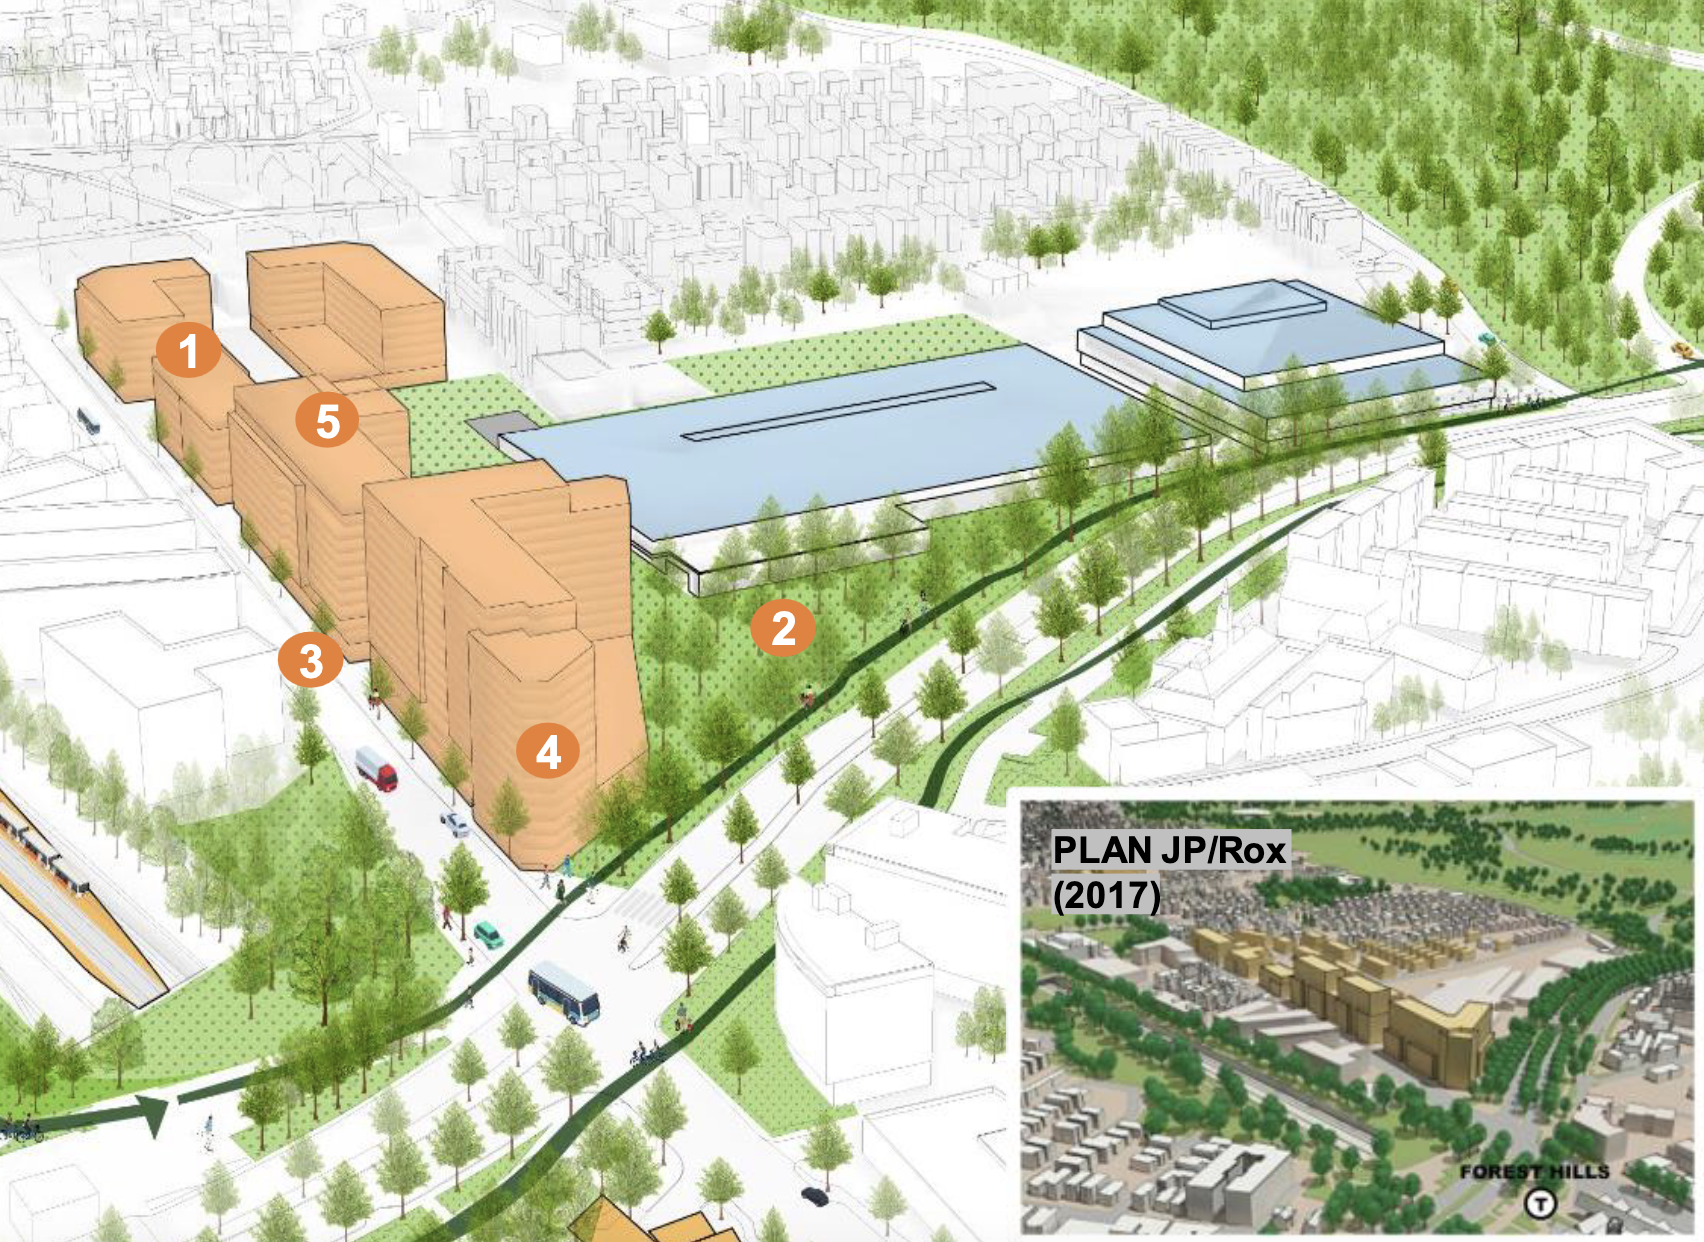 A sketch of proposed new housing alongside a new Arborway bus garage in Jamaica Plain, seen from an aerial perspective from over the Arnold Arboretum, looking toward Franklin Park. On the left edge of the sketch are a row of salmon-colored mid-rise buildings, indicating potential new housing along Washington Street. In the center is a large, single-story warehouse-style building in blue, which indicates the rough shape of a proposed new MBTA bus garage. The Arborway highway and greenway are in the foreground, running from the lower-left corner to the upper-right edge.